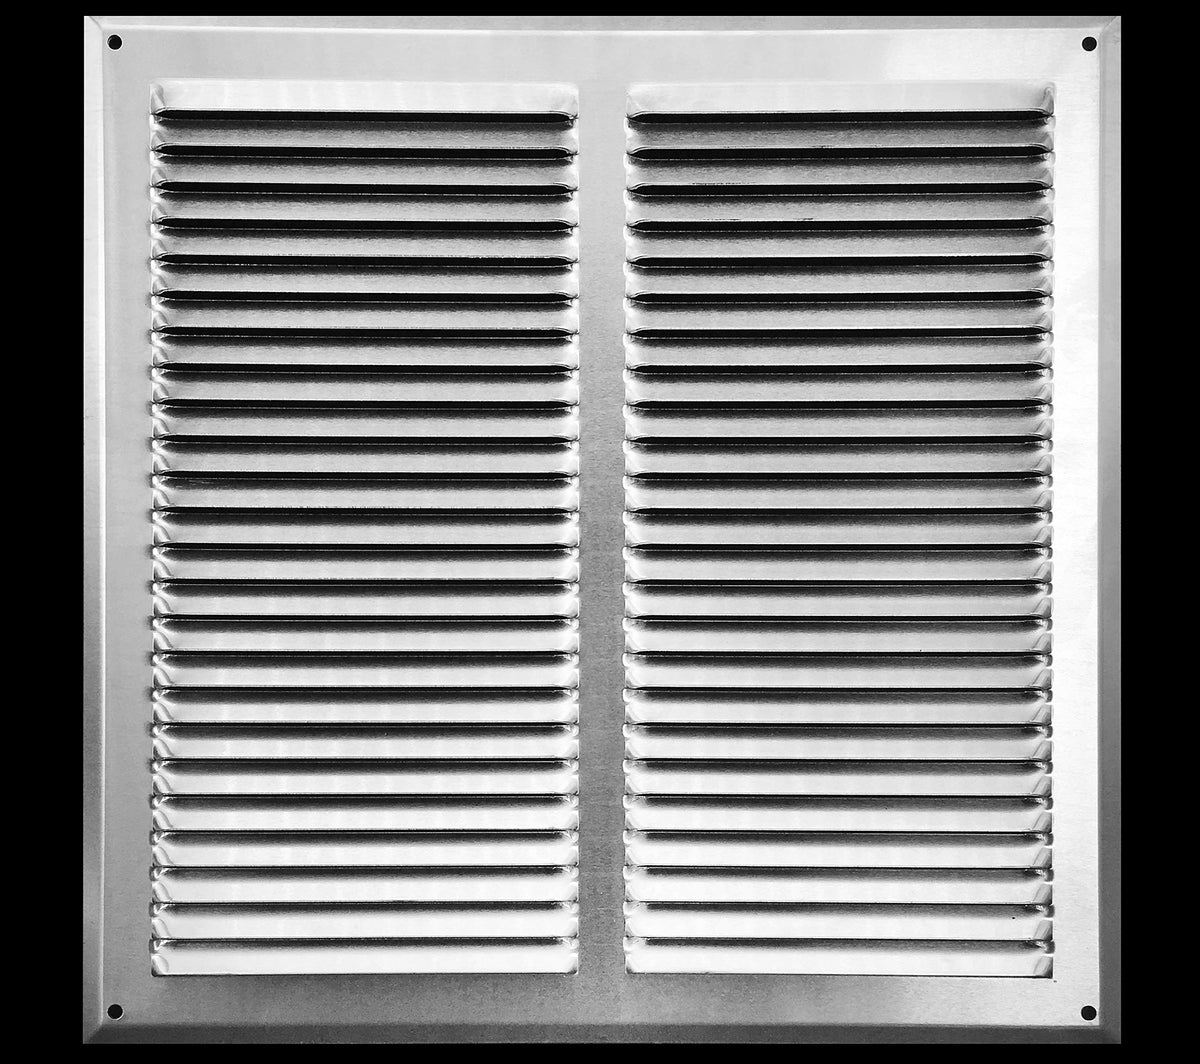 6&quot; X 6&quot; Outdoor Return Air Grille – For Outdoor Use - HVAC Vent Duct Cover Diffuser – [1.0mm Polished Aluminum] [Outer Dimensions: 7.75w X 7.75h]